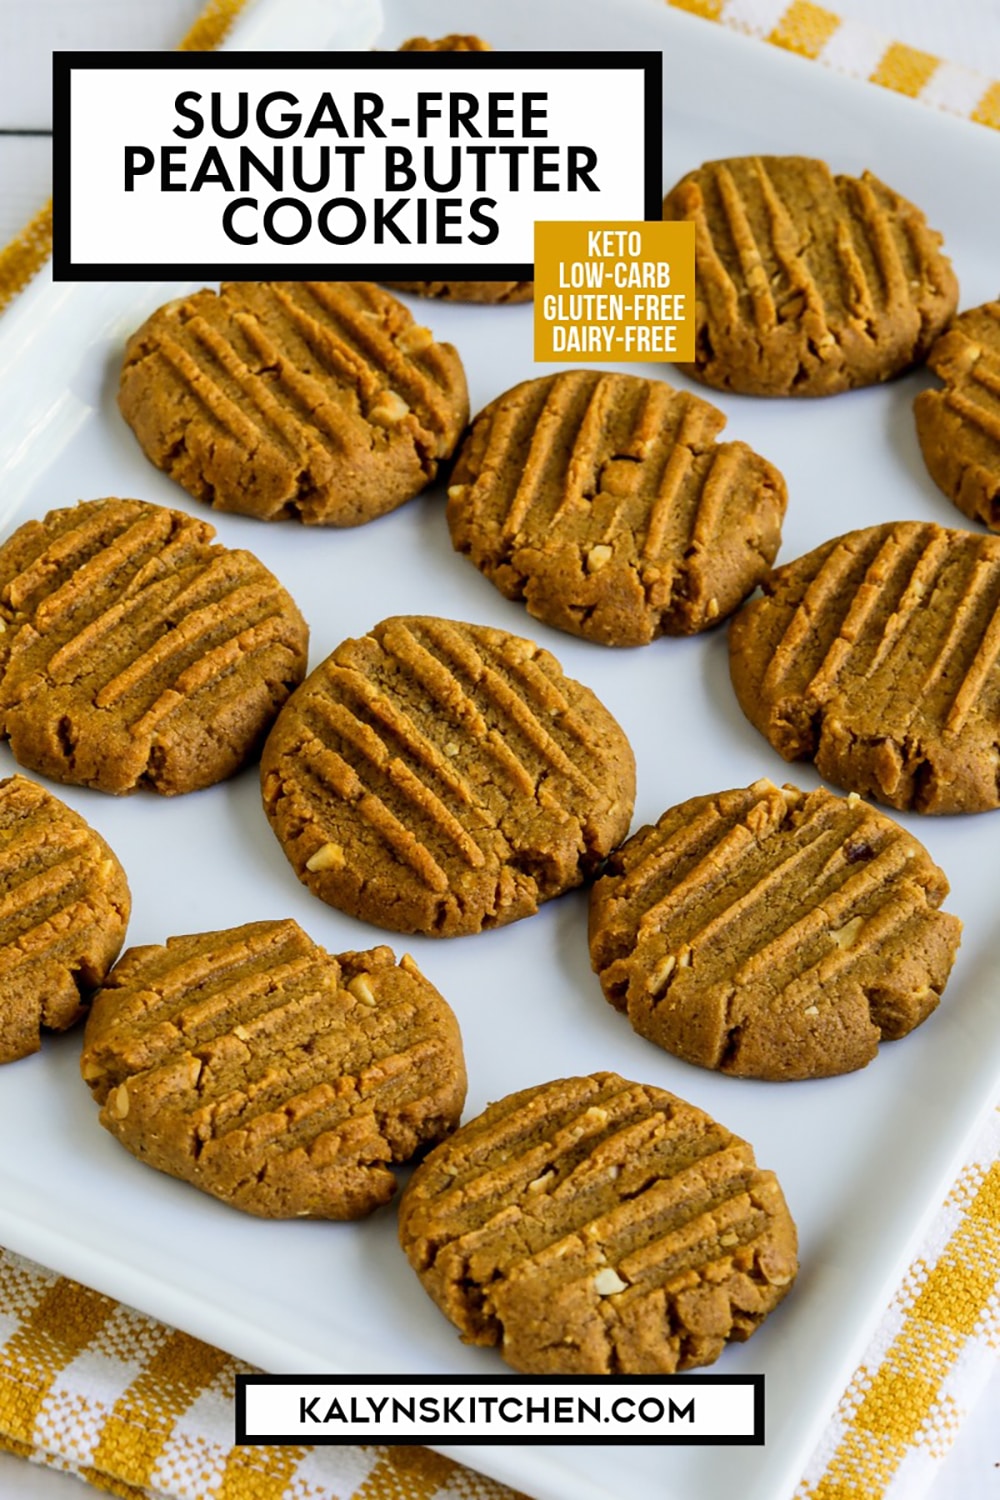 Pinterest image for Sugar-Free Peanut Butter Cookies